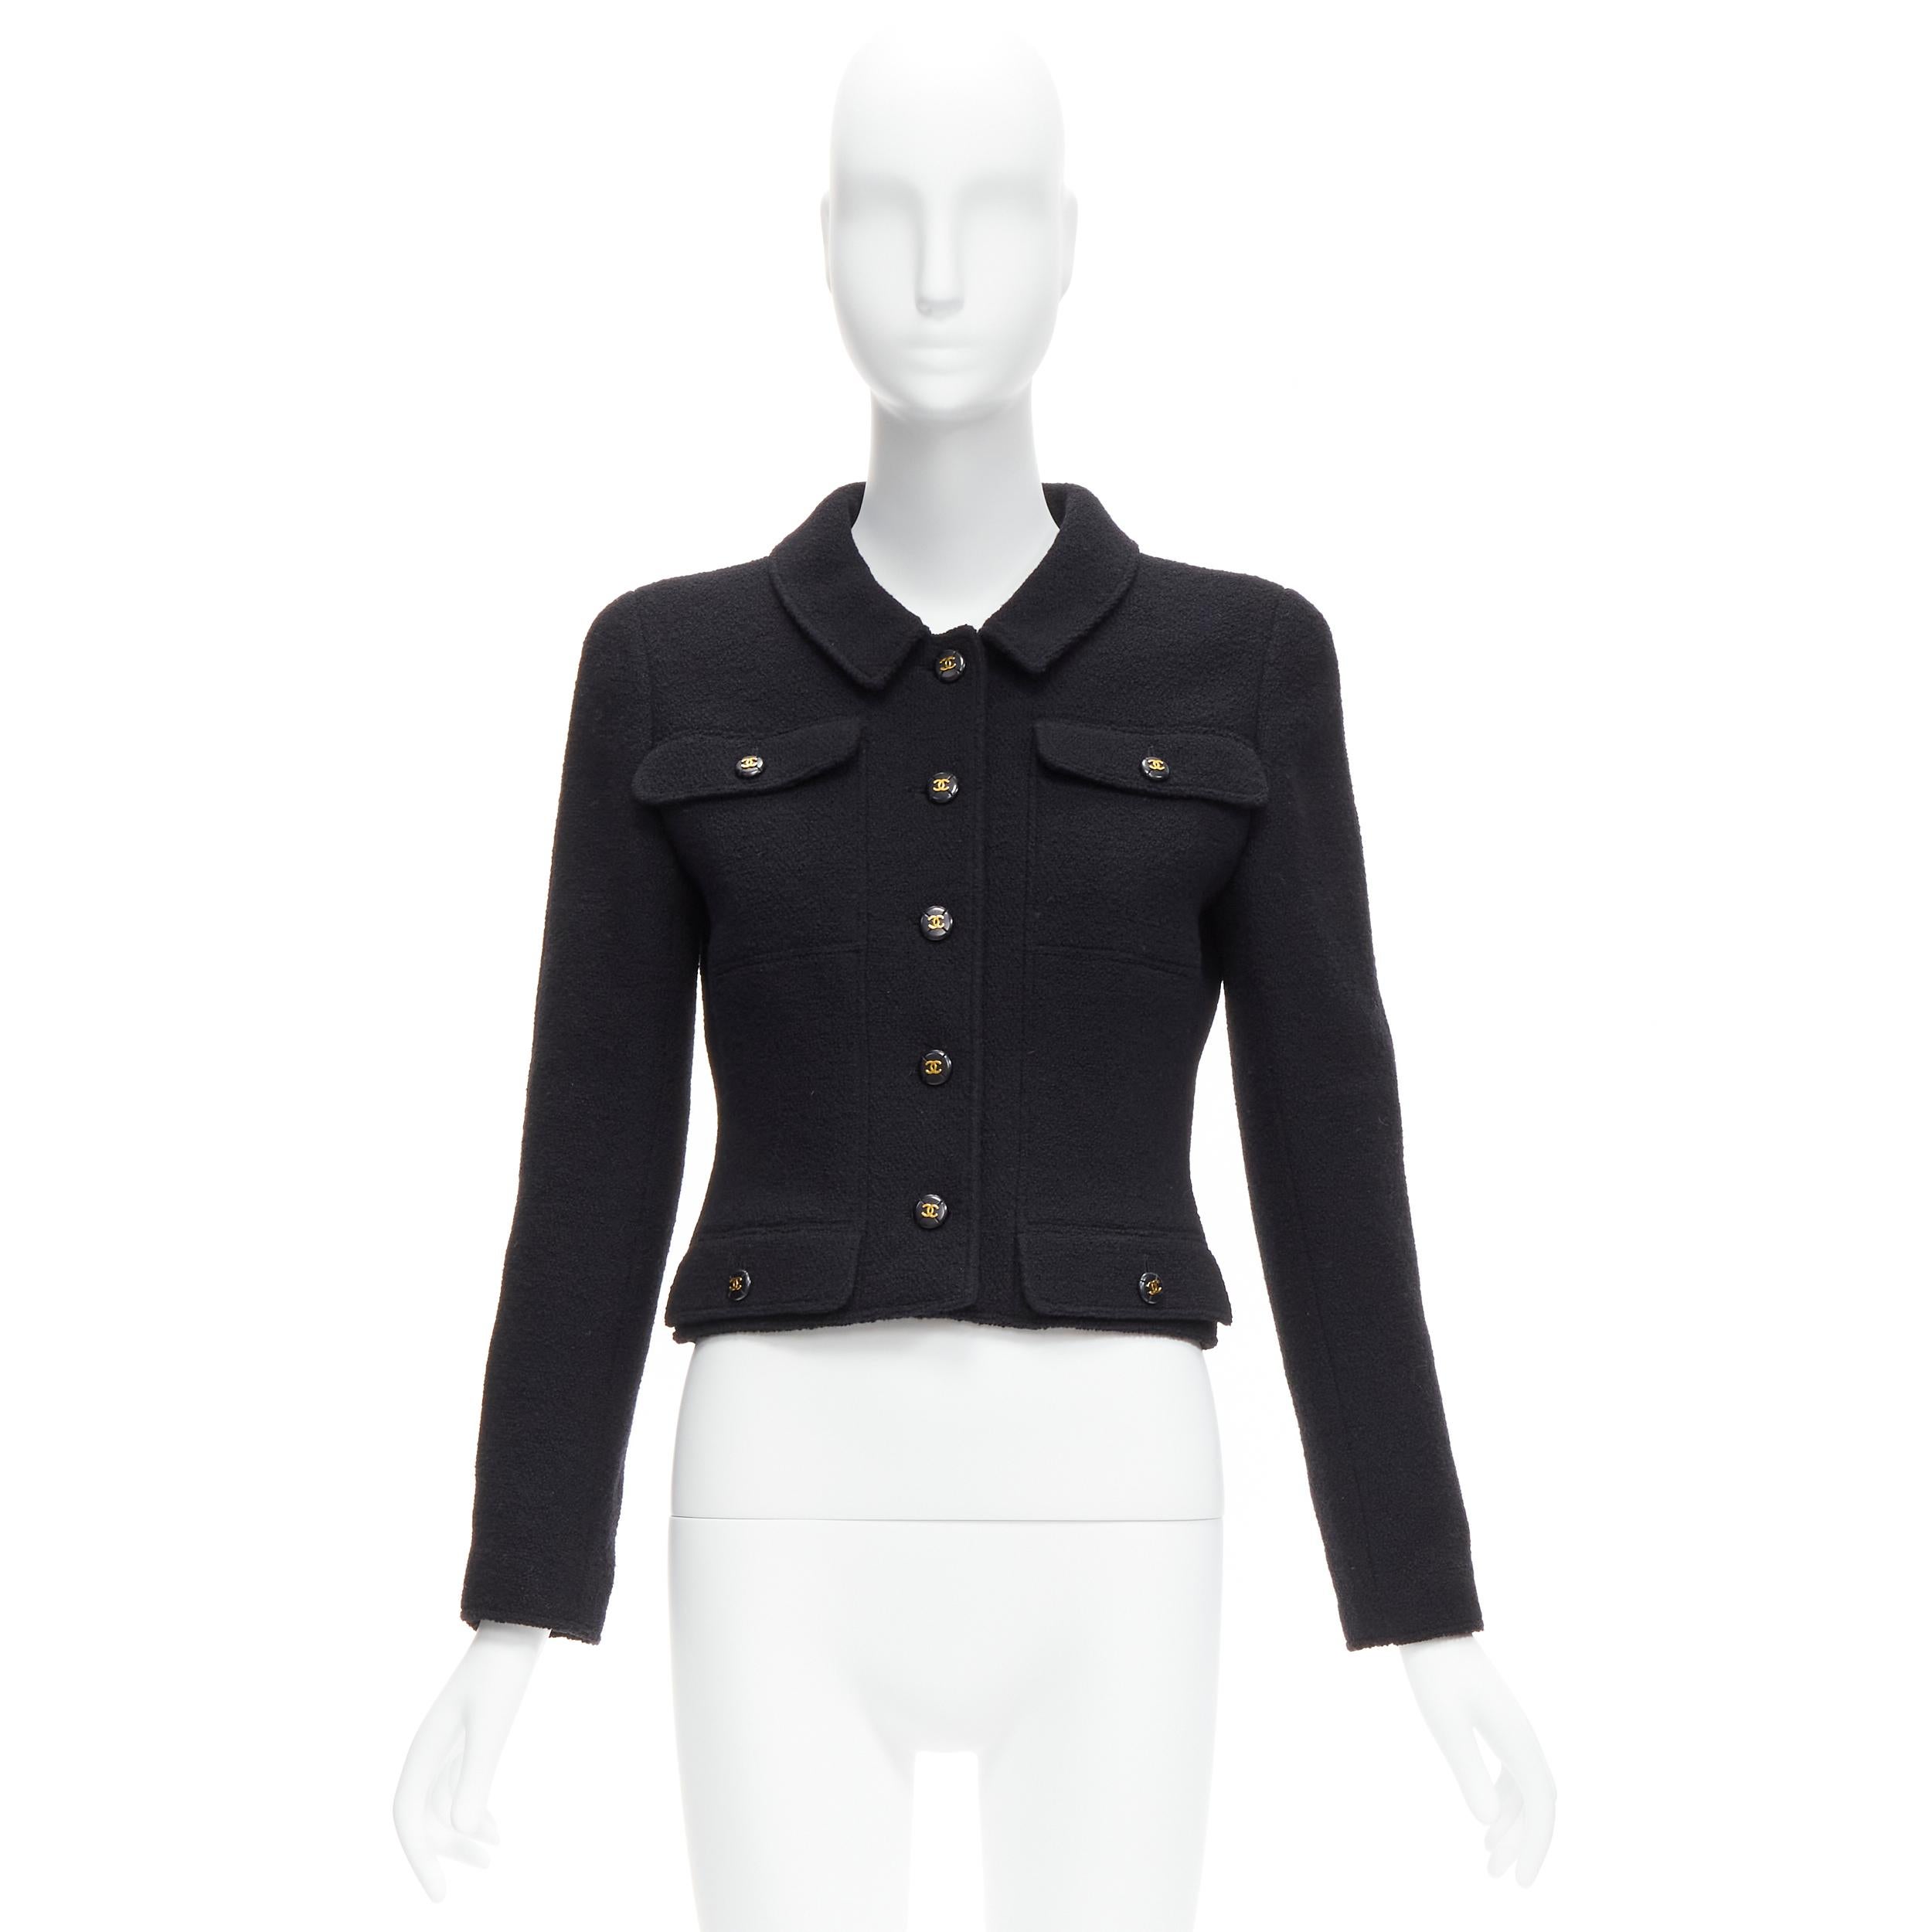 CHANEL 95P black wool crepe gold CC button 4 pocket cropped jacket top 7